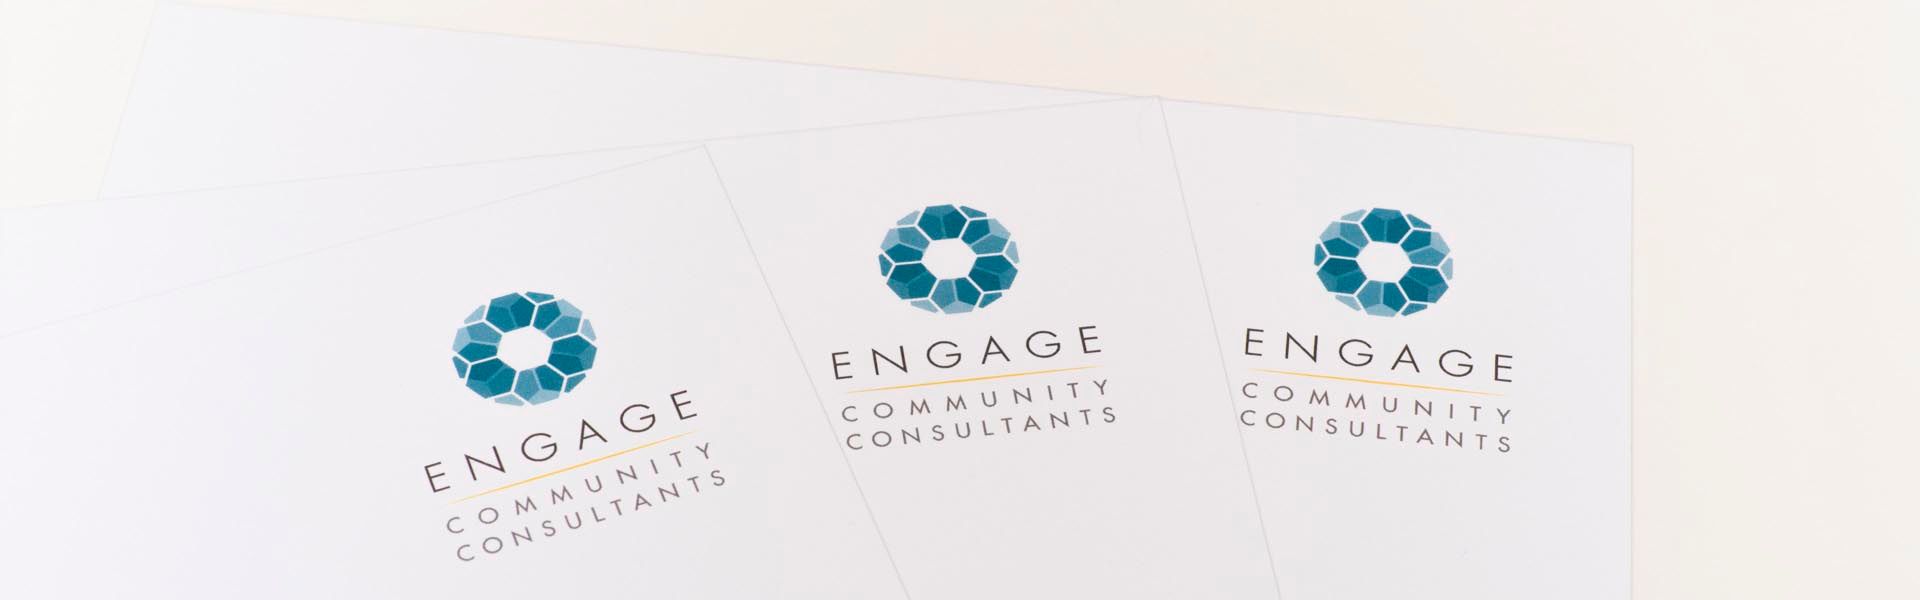 three pieces of paper that say engage community consultants